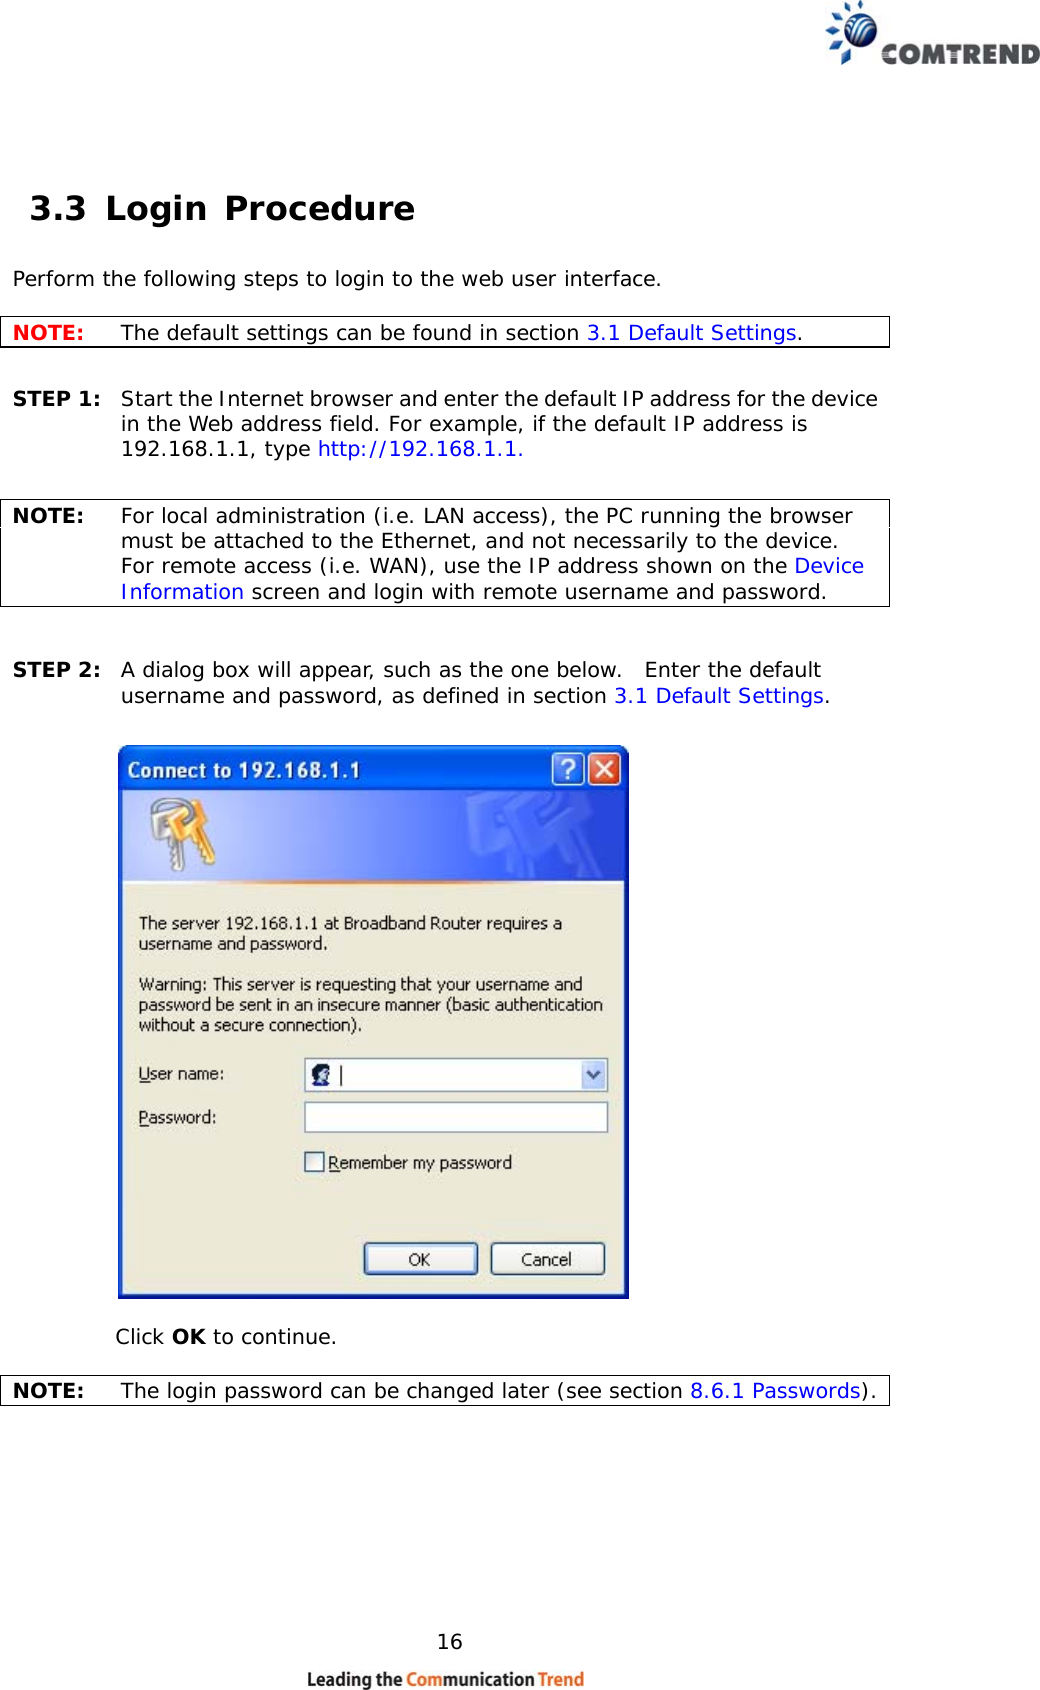    16  3.3 Login Procedure Perform the following steps to login to the web user interface.    NOTE:  The default settings can be found in section 3.1 Default Settings.     STEP 1:  Start the Internet browser and enter the default IP address for the device in the Web address field. For example, if the default IP address is 192.168.1.1, type http://192.168.1.1.  NOTE:  For local administration (i.e. LAN access), the PC running the browser must be attached to the Ethernet, and not necessarily to the device.   For remote access (i.e. WAN), use the IP address shown on the Device Information screen and login with remote username and password.  STEP 2:  A dialog box will appear, such as the one below.  Enter the default username and password, as defined in section 3.1 Default Settings.      Click OK to continue.  NOTE:   The login password can be changed later (see section 8.6.1 Passwords).   